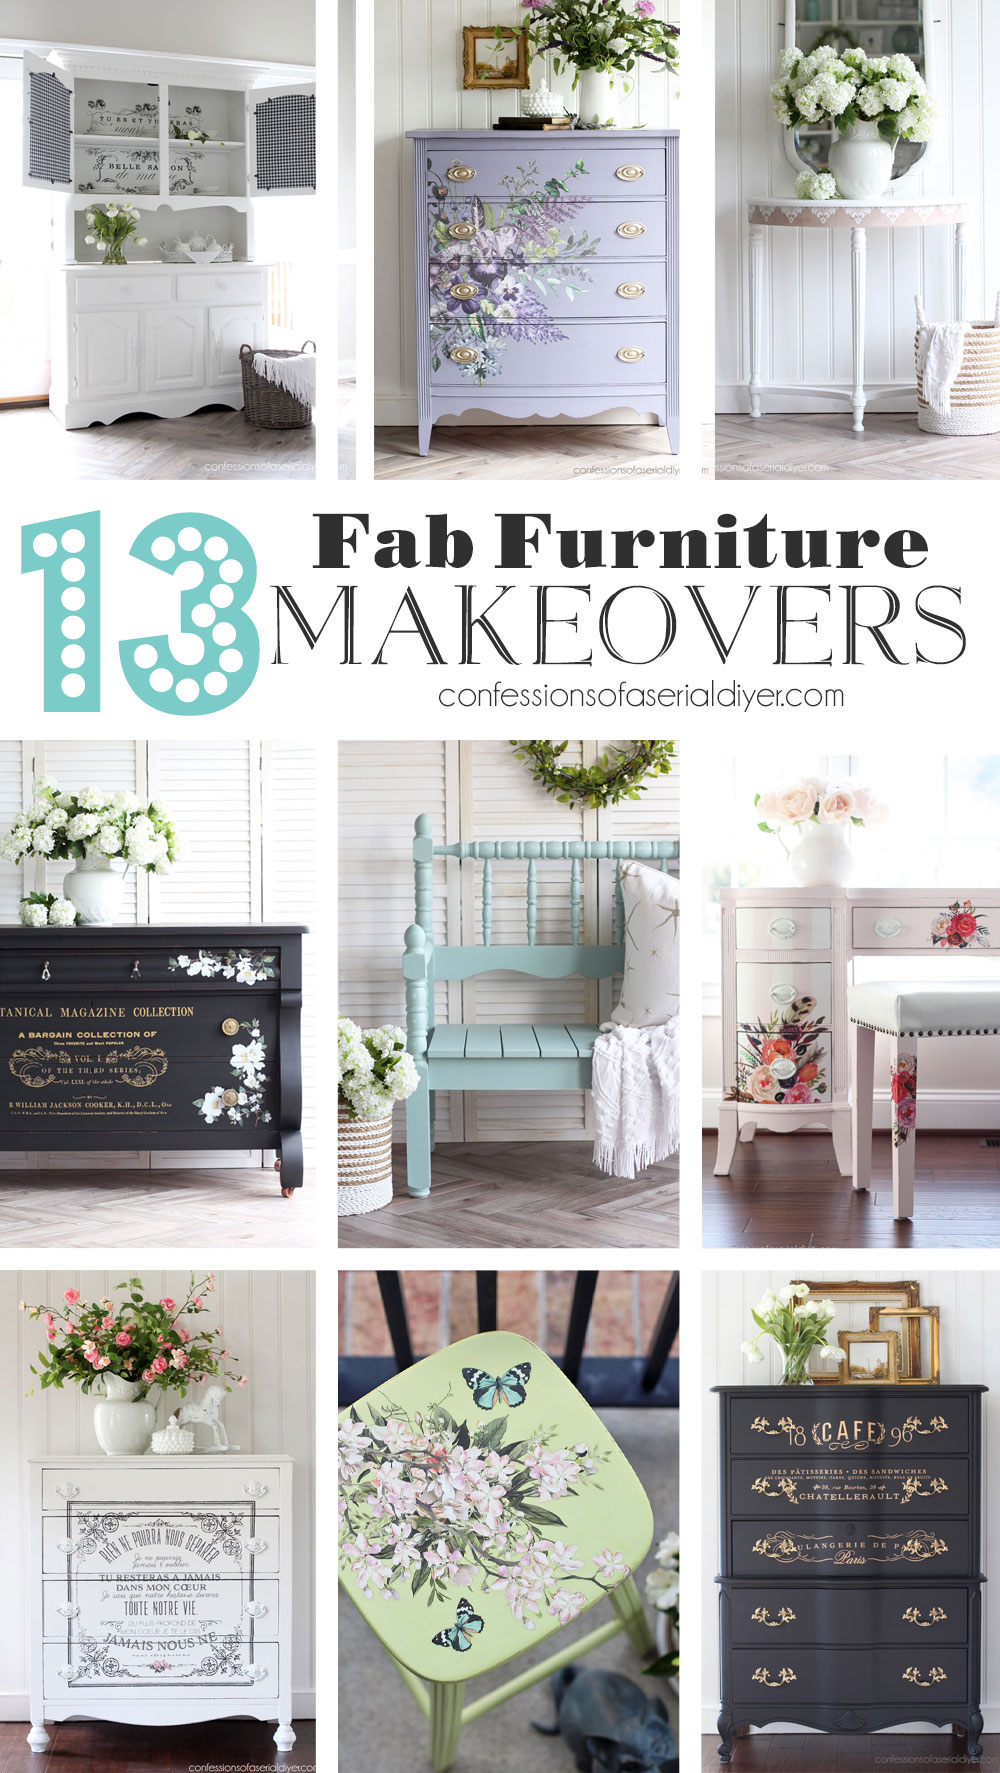 13 Fab Furniture Makeovers